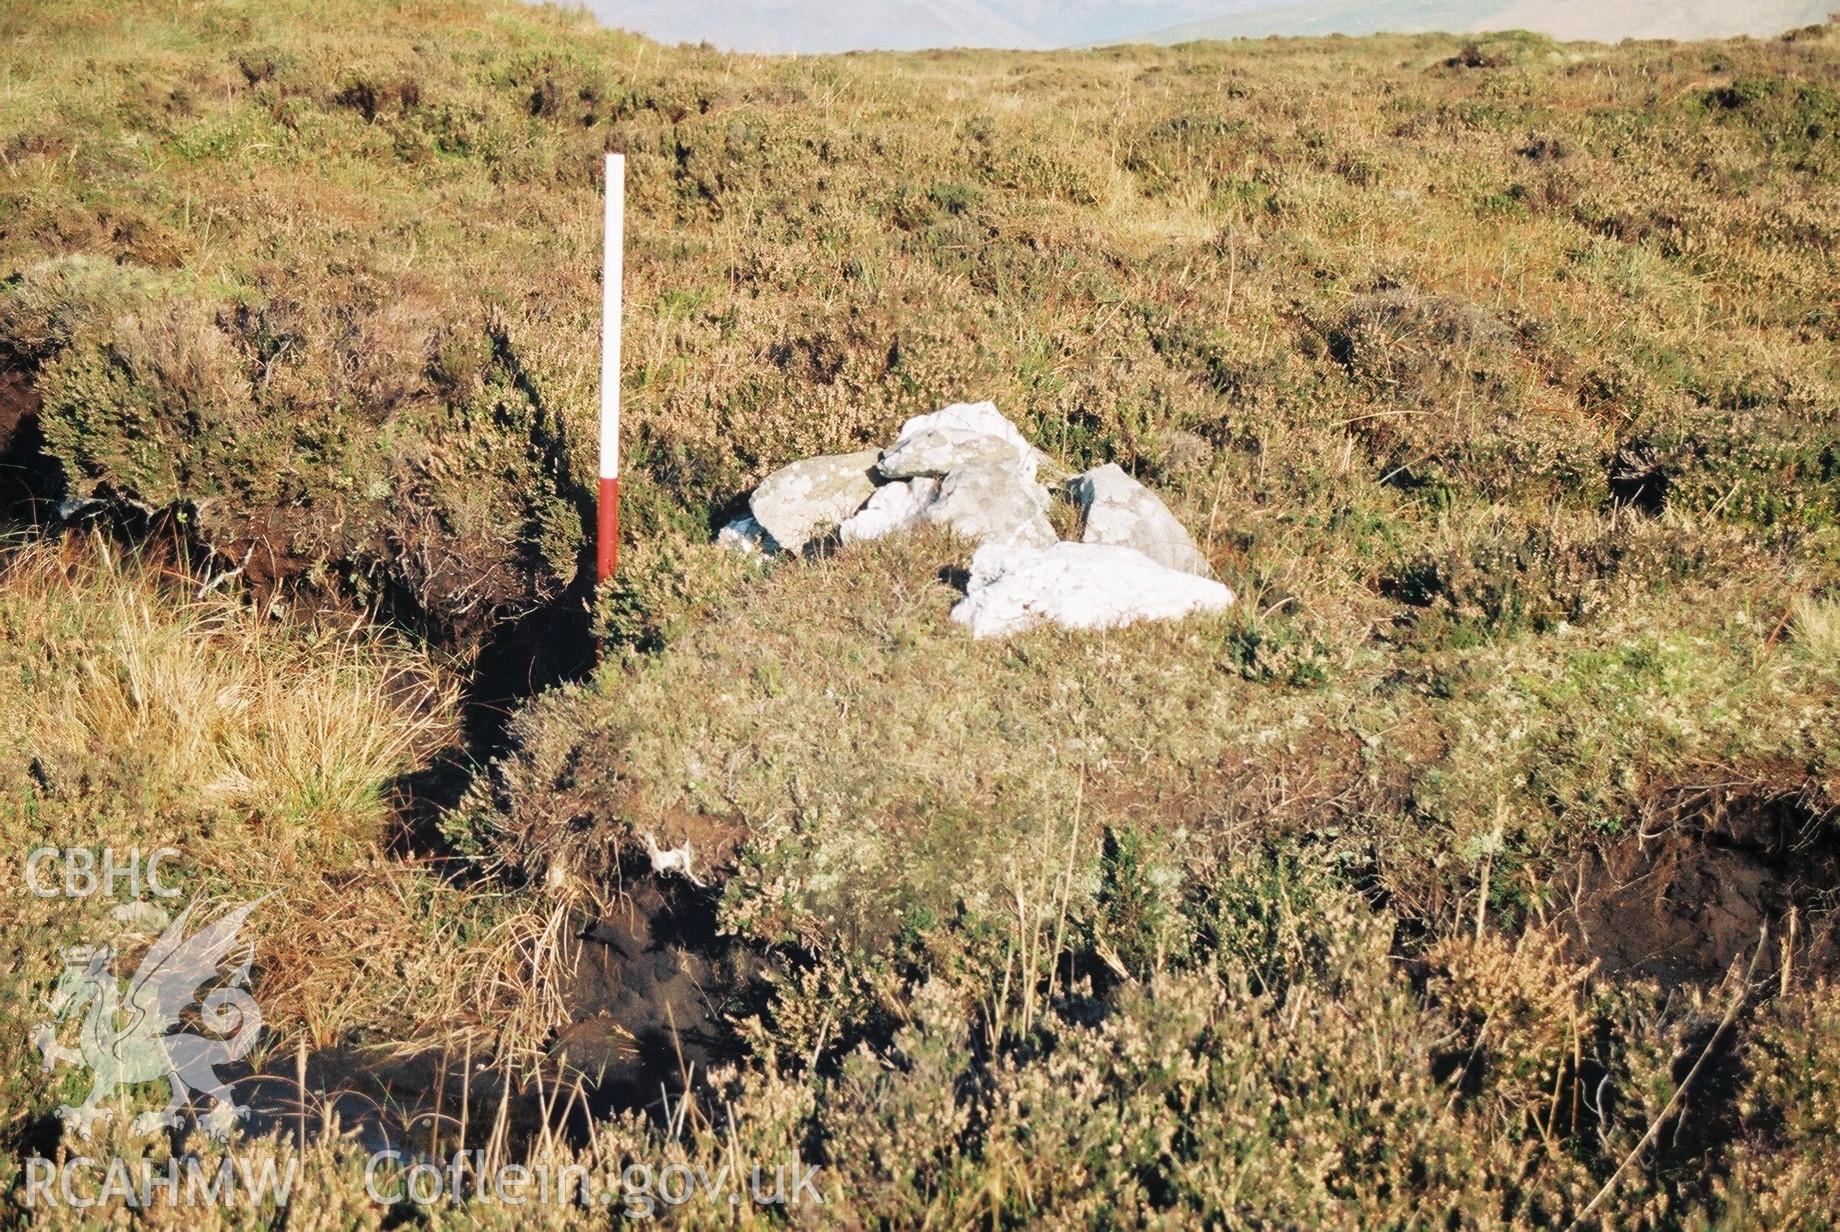 Digital colour photograph of a cairn at Tarren Nantymynach taken on 27/10/2005 by B. Britton during the Tywyn Dolgoch Upland Survey undertaken by Archaeophysica.